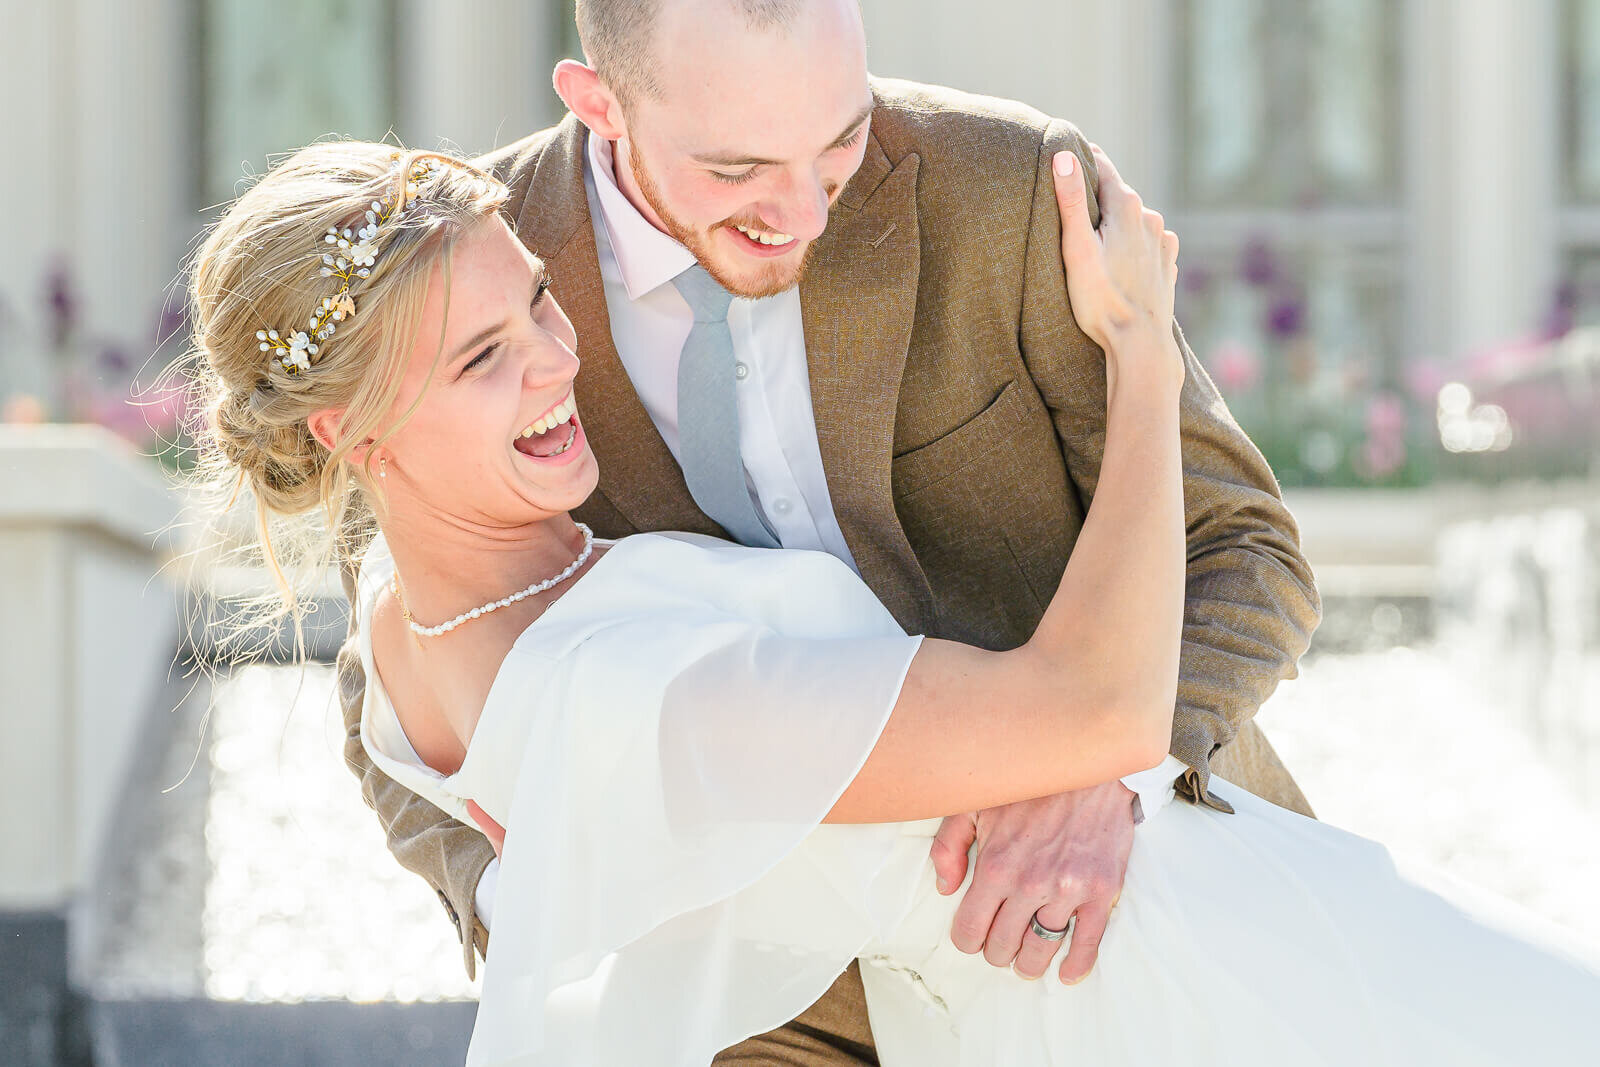 Utah bride and groom laughing after their spring wedding. Captured at the payson temple.